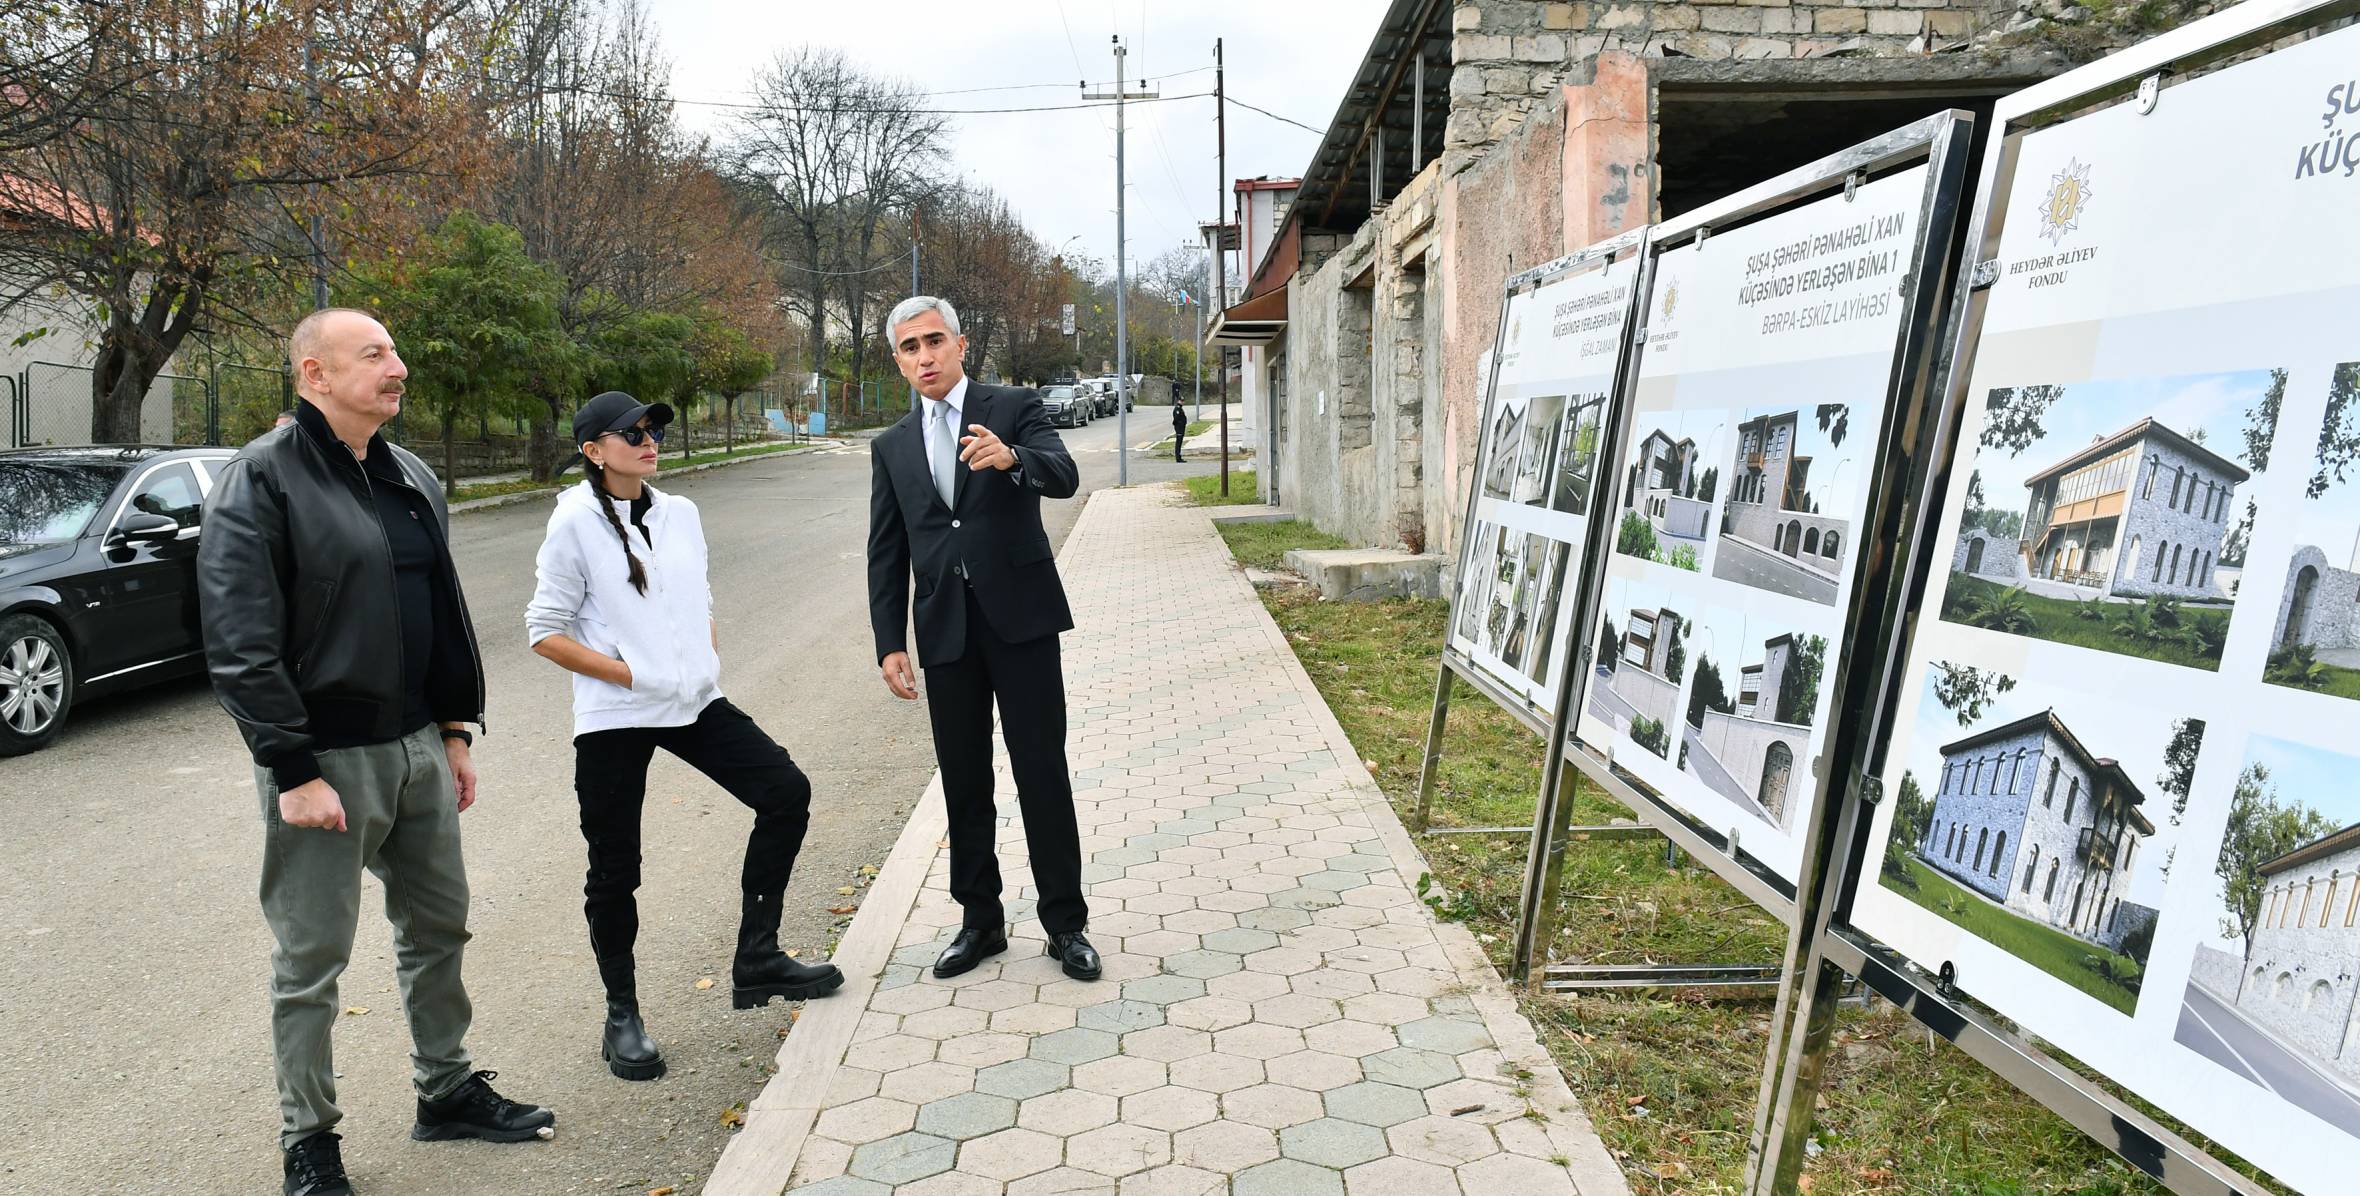 Ilham Aliyev examined projects of restoration and reconstruction of some buildings on Panah Ali Khan Street to be implemented by Heydar Aliyev Foundation